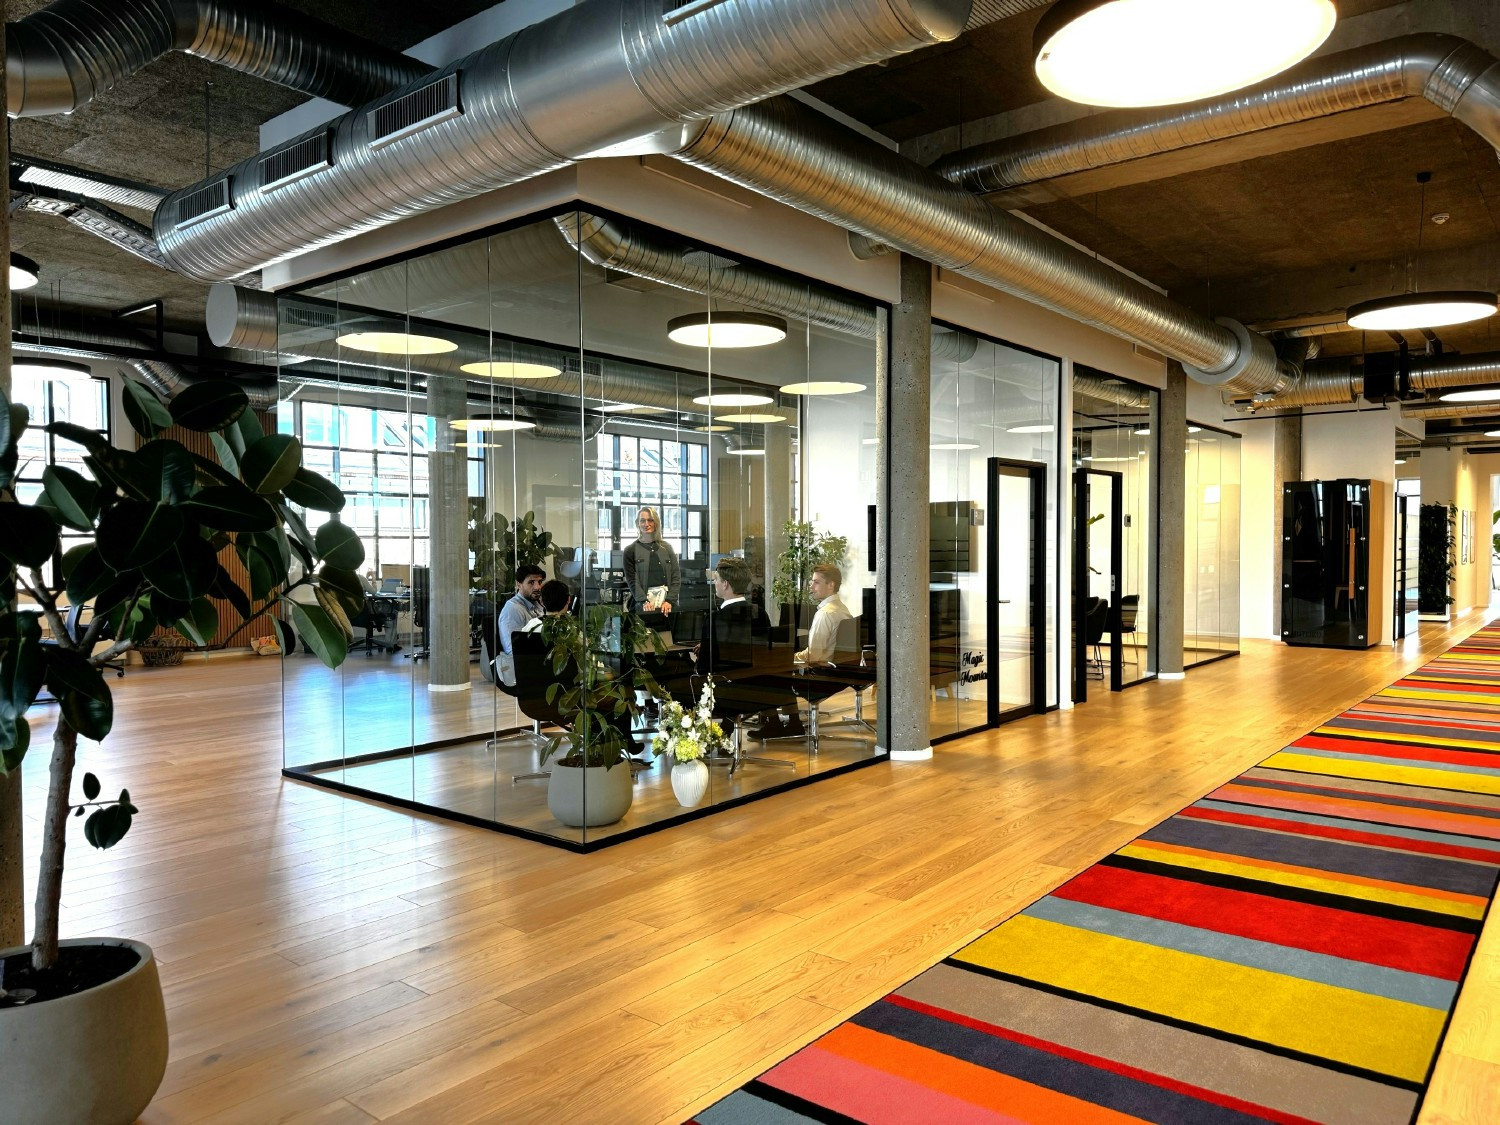 Showcasing the 30+ meter carpet and our meeting facilities